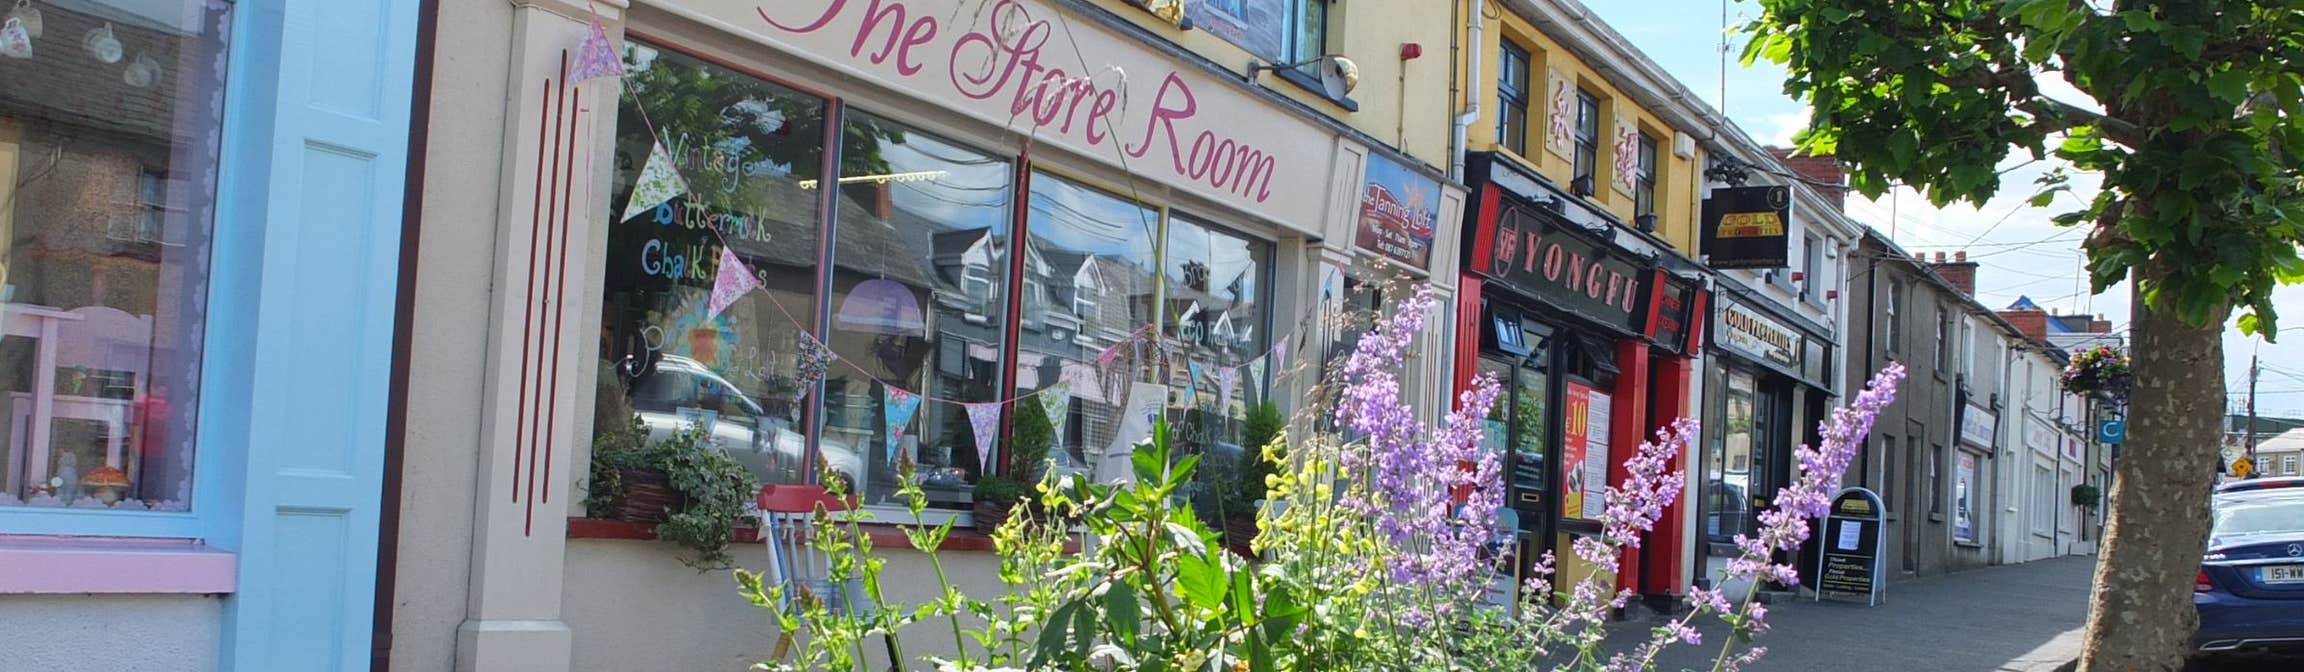 Image of a shopfront in Gorey in County Wexford